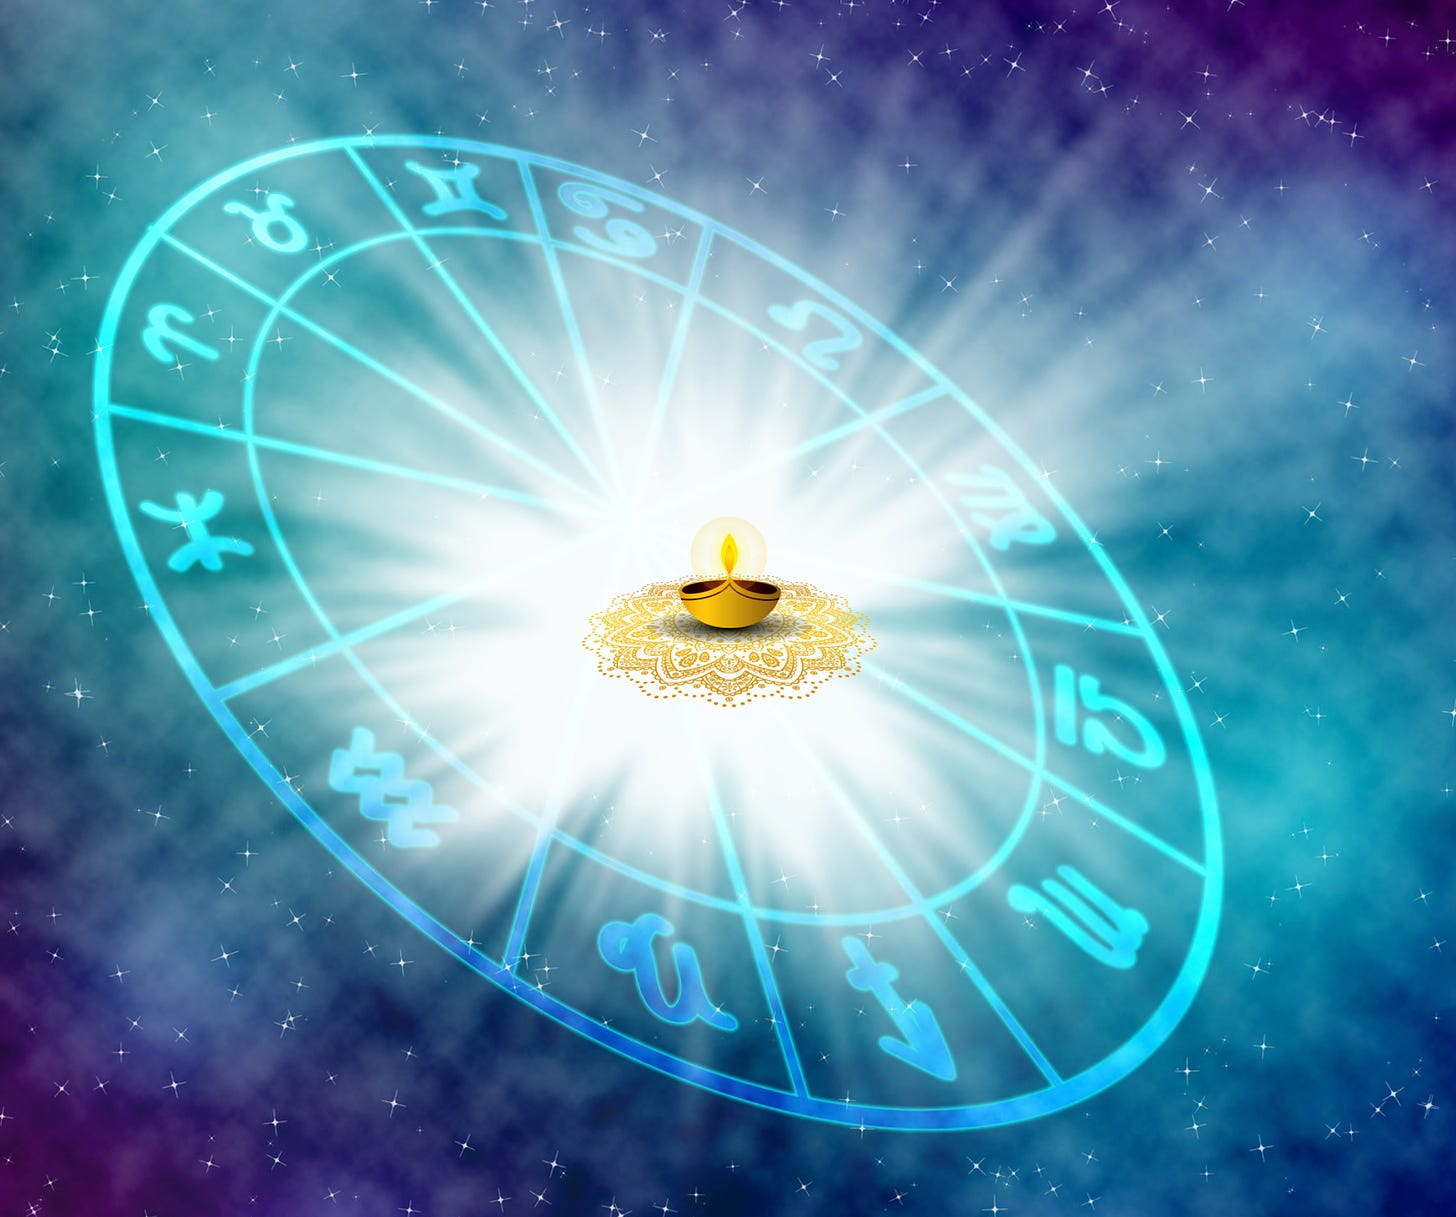 The image shows a horoscope with a diya (lighted lamp) in the centre. The image is part of the article titled "Standard time or Local Mean Time- which one to used in casting horoscopes" authored by Anish Prasad and published at https://rationalastro.org